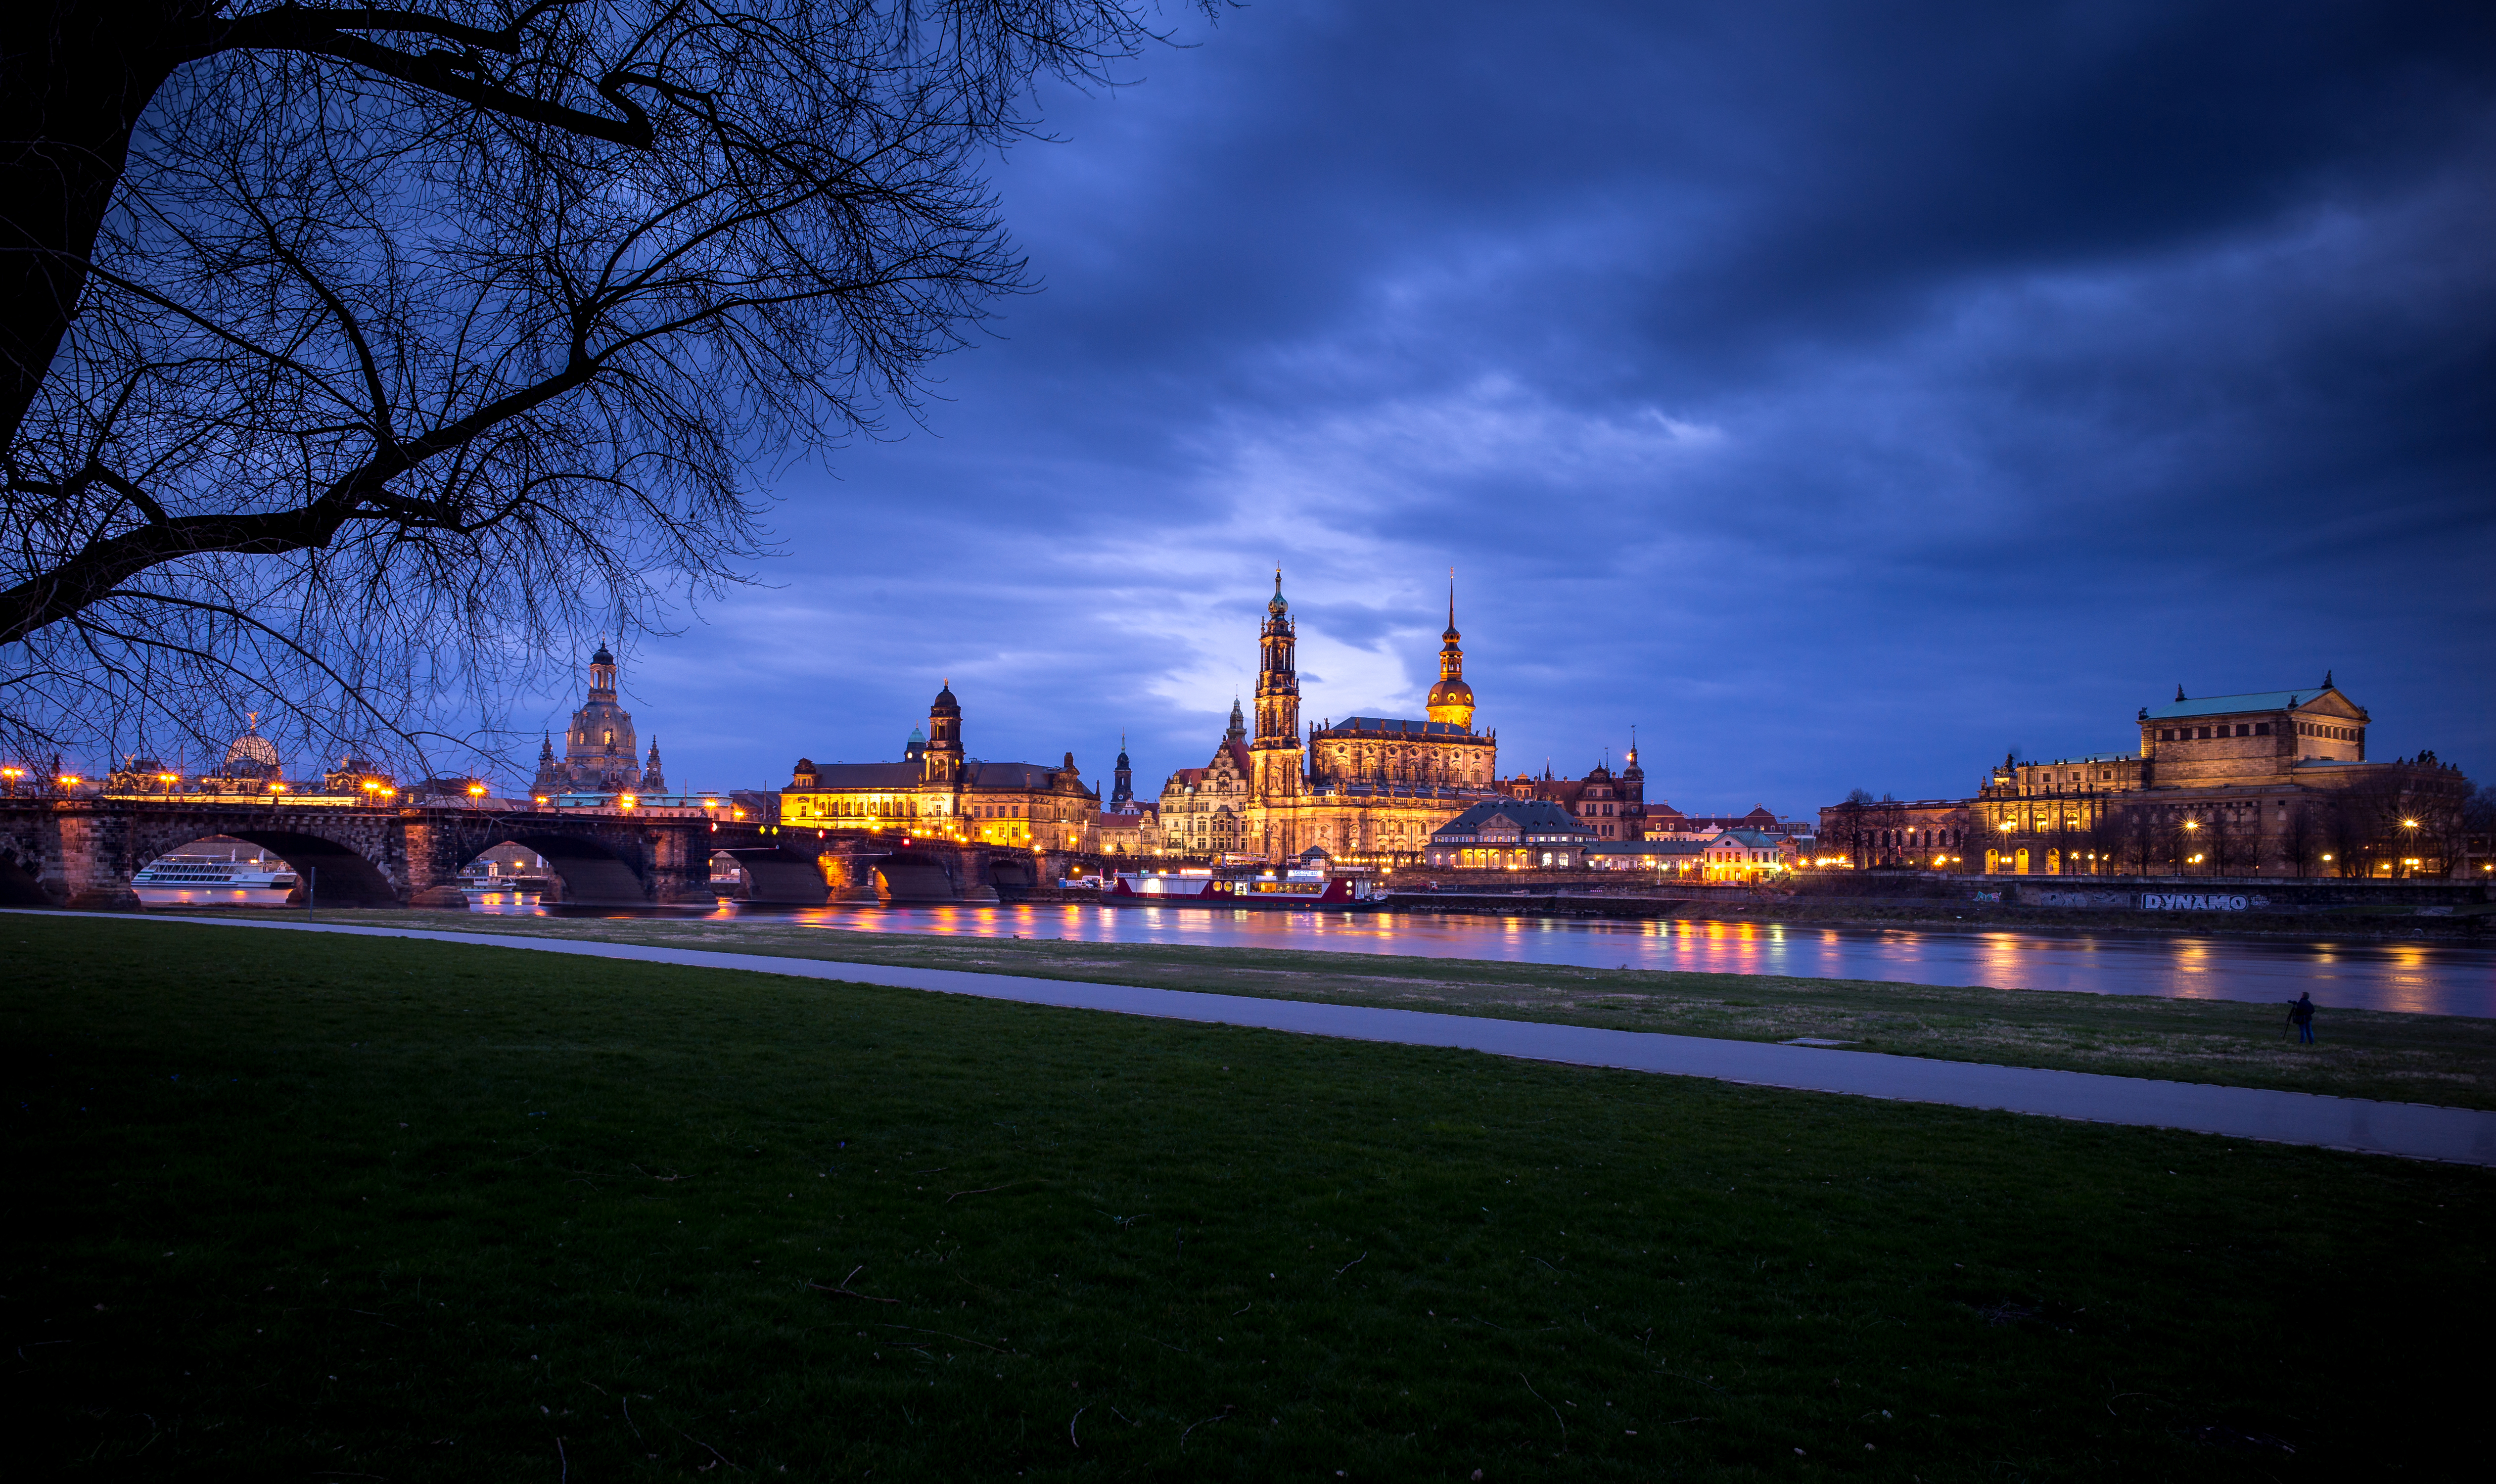 man made, dresden, building, city, germany, grass, night, river, cities lock screen backgrounds